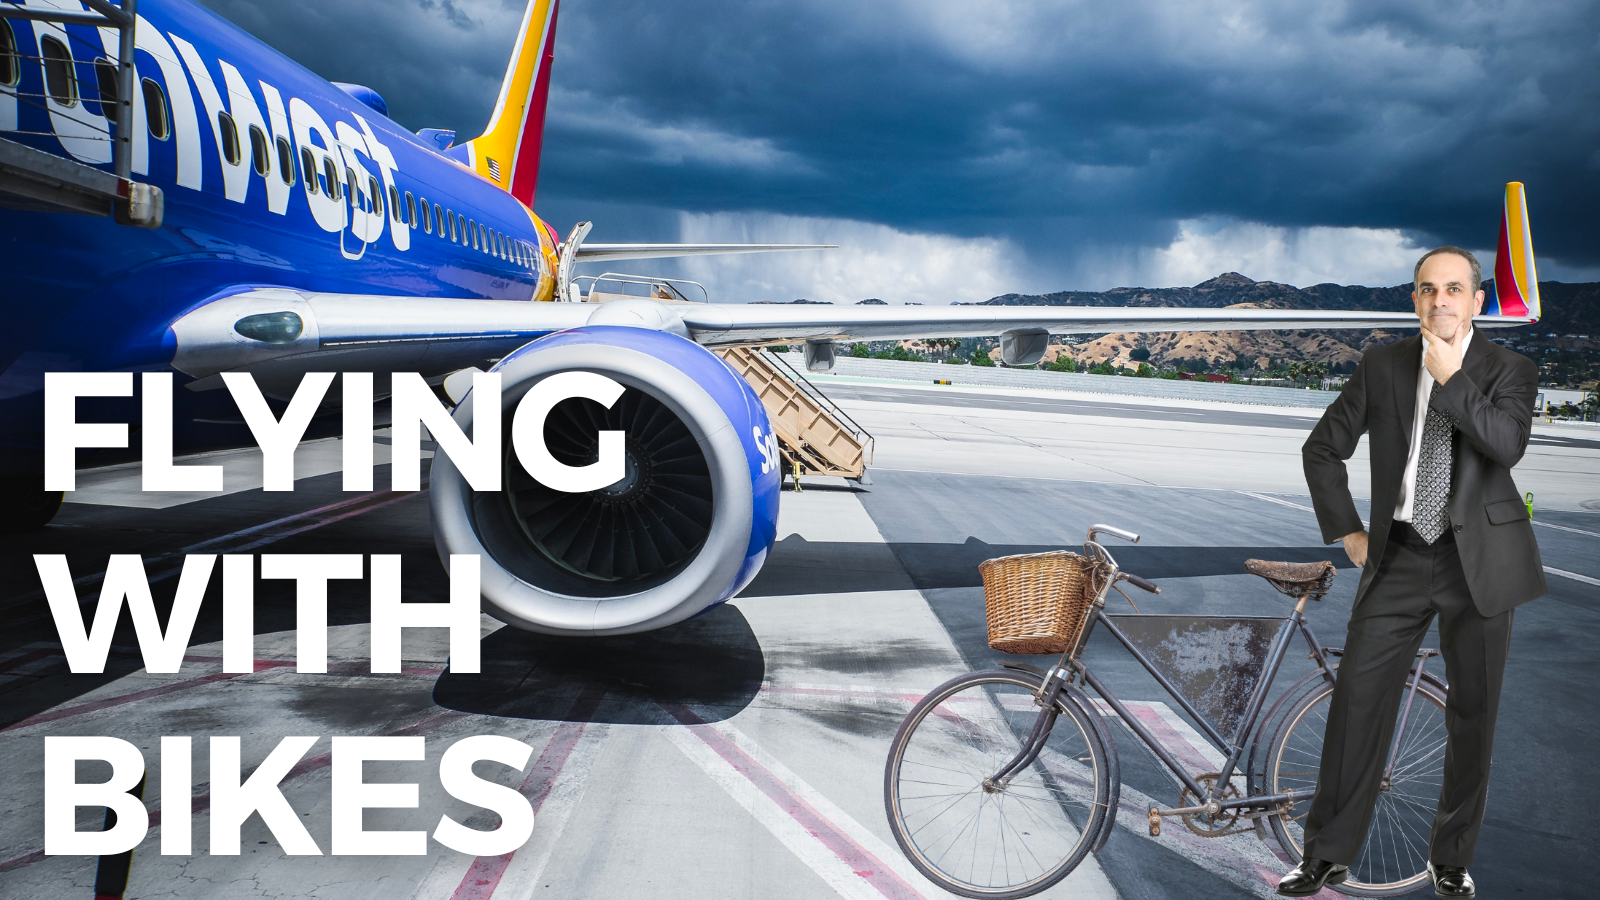 man with bike standing next to southwest airlines plane